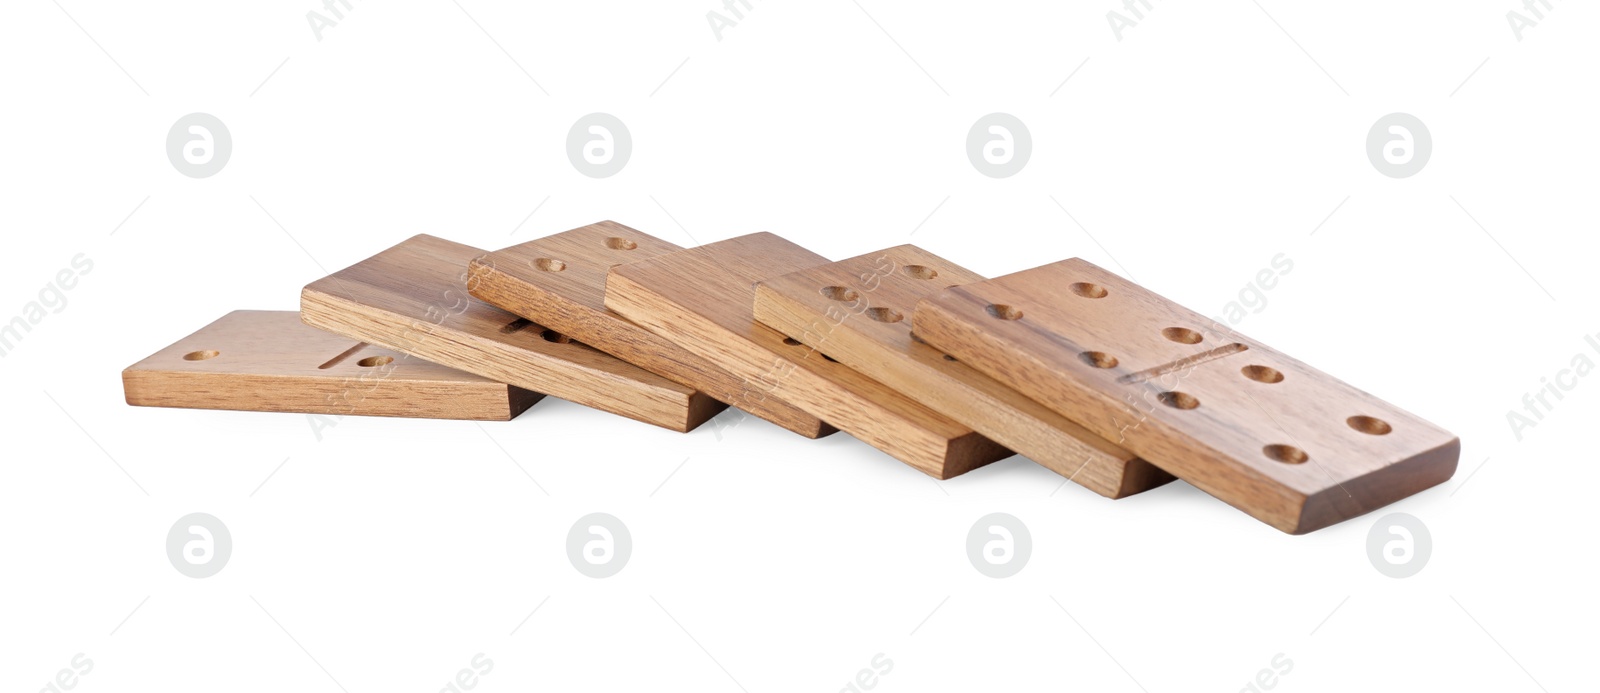 Photo of Fallen wooden domino tiles with pips isolated on white